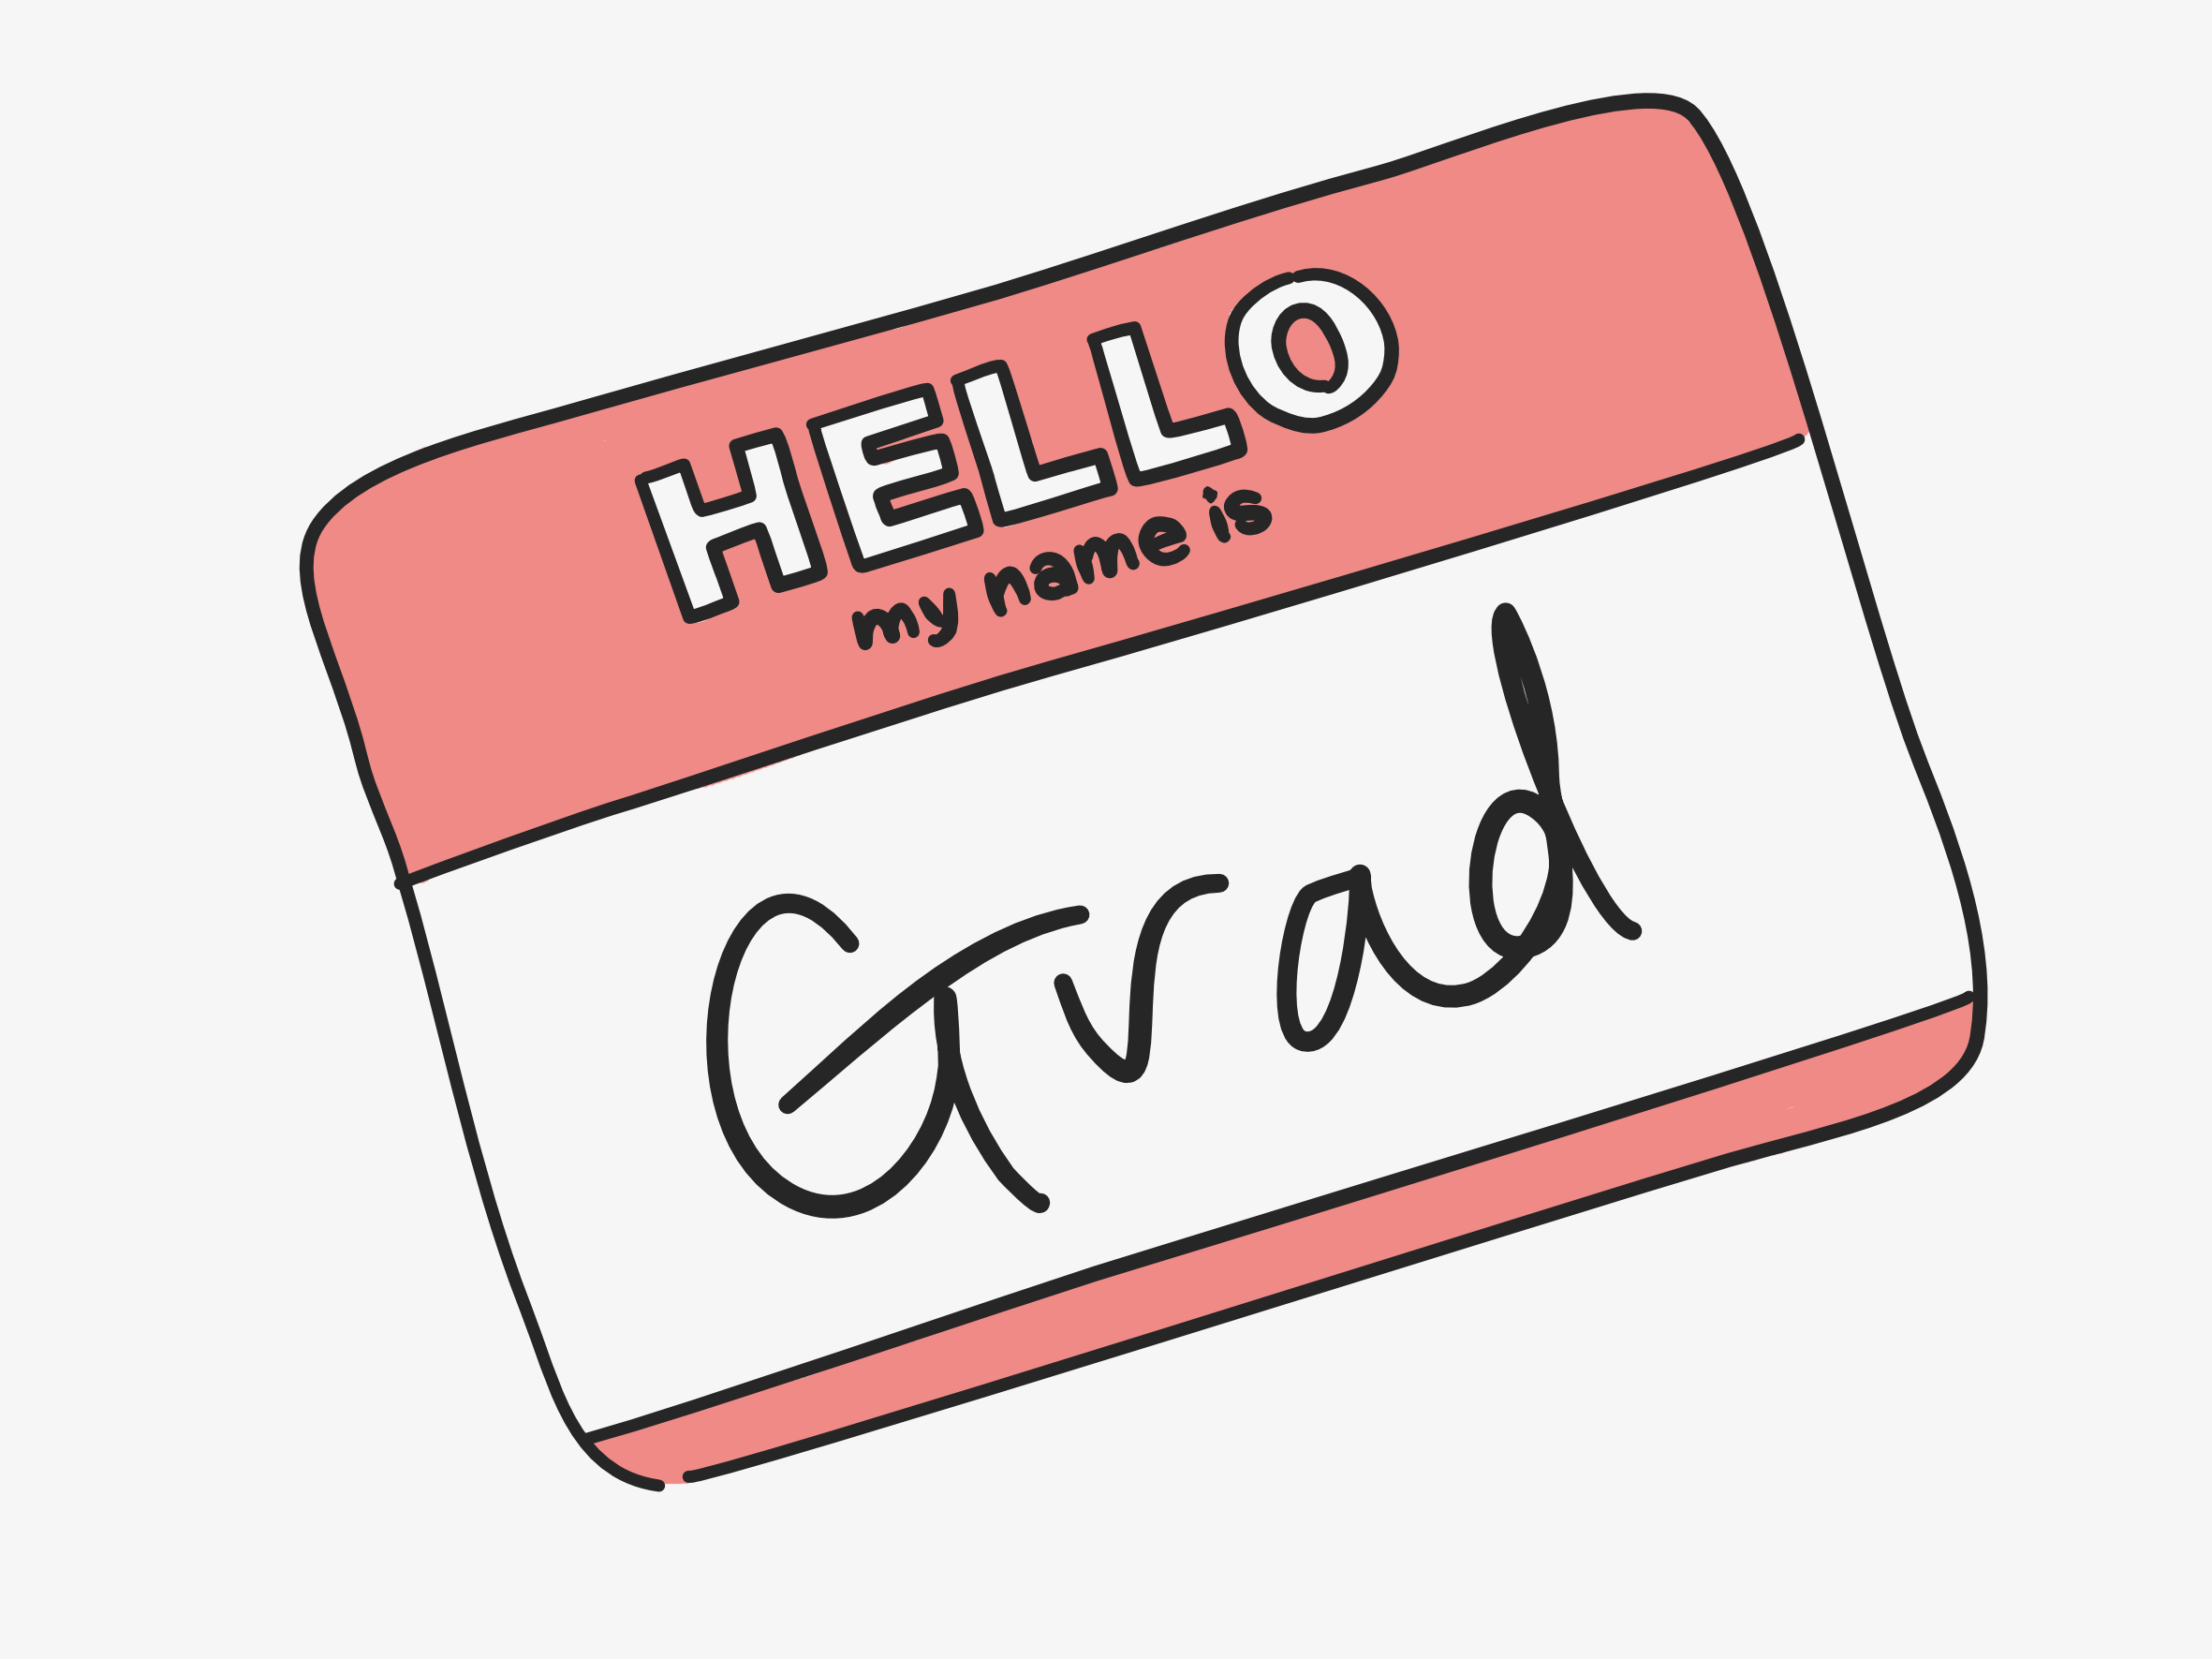 How to get the most out of a grad scheme